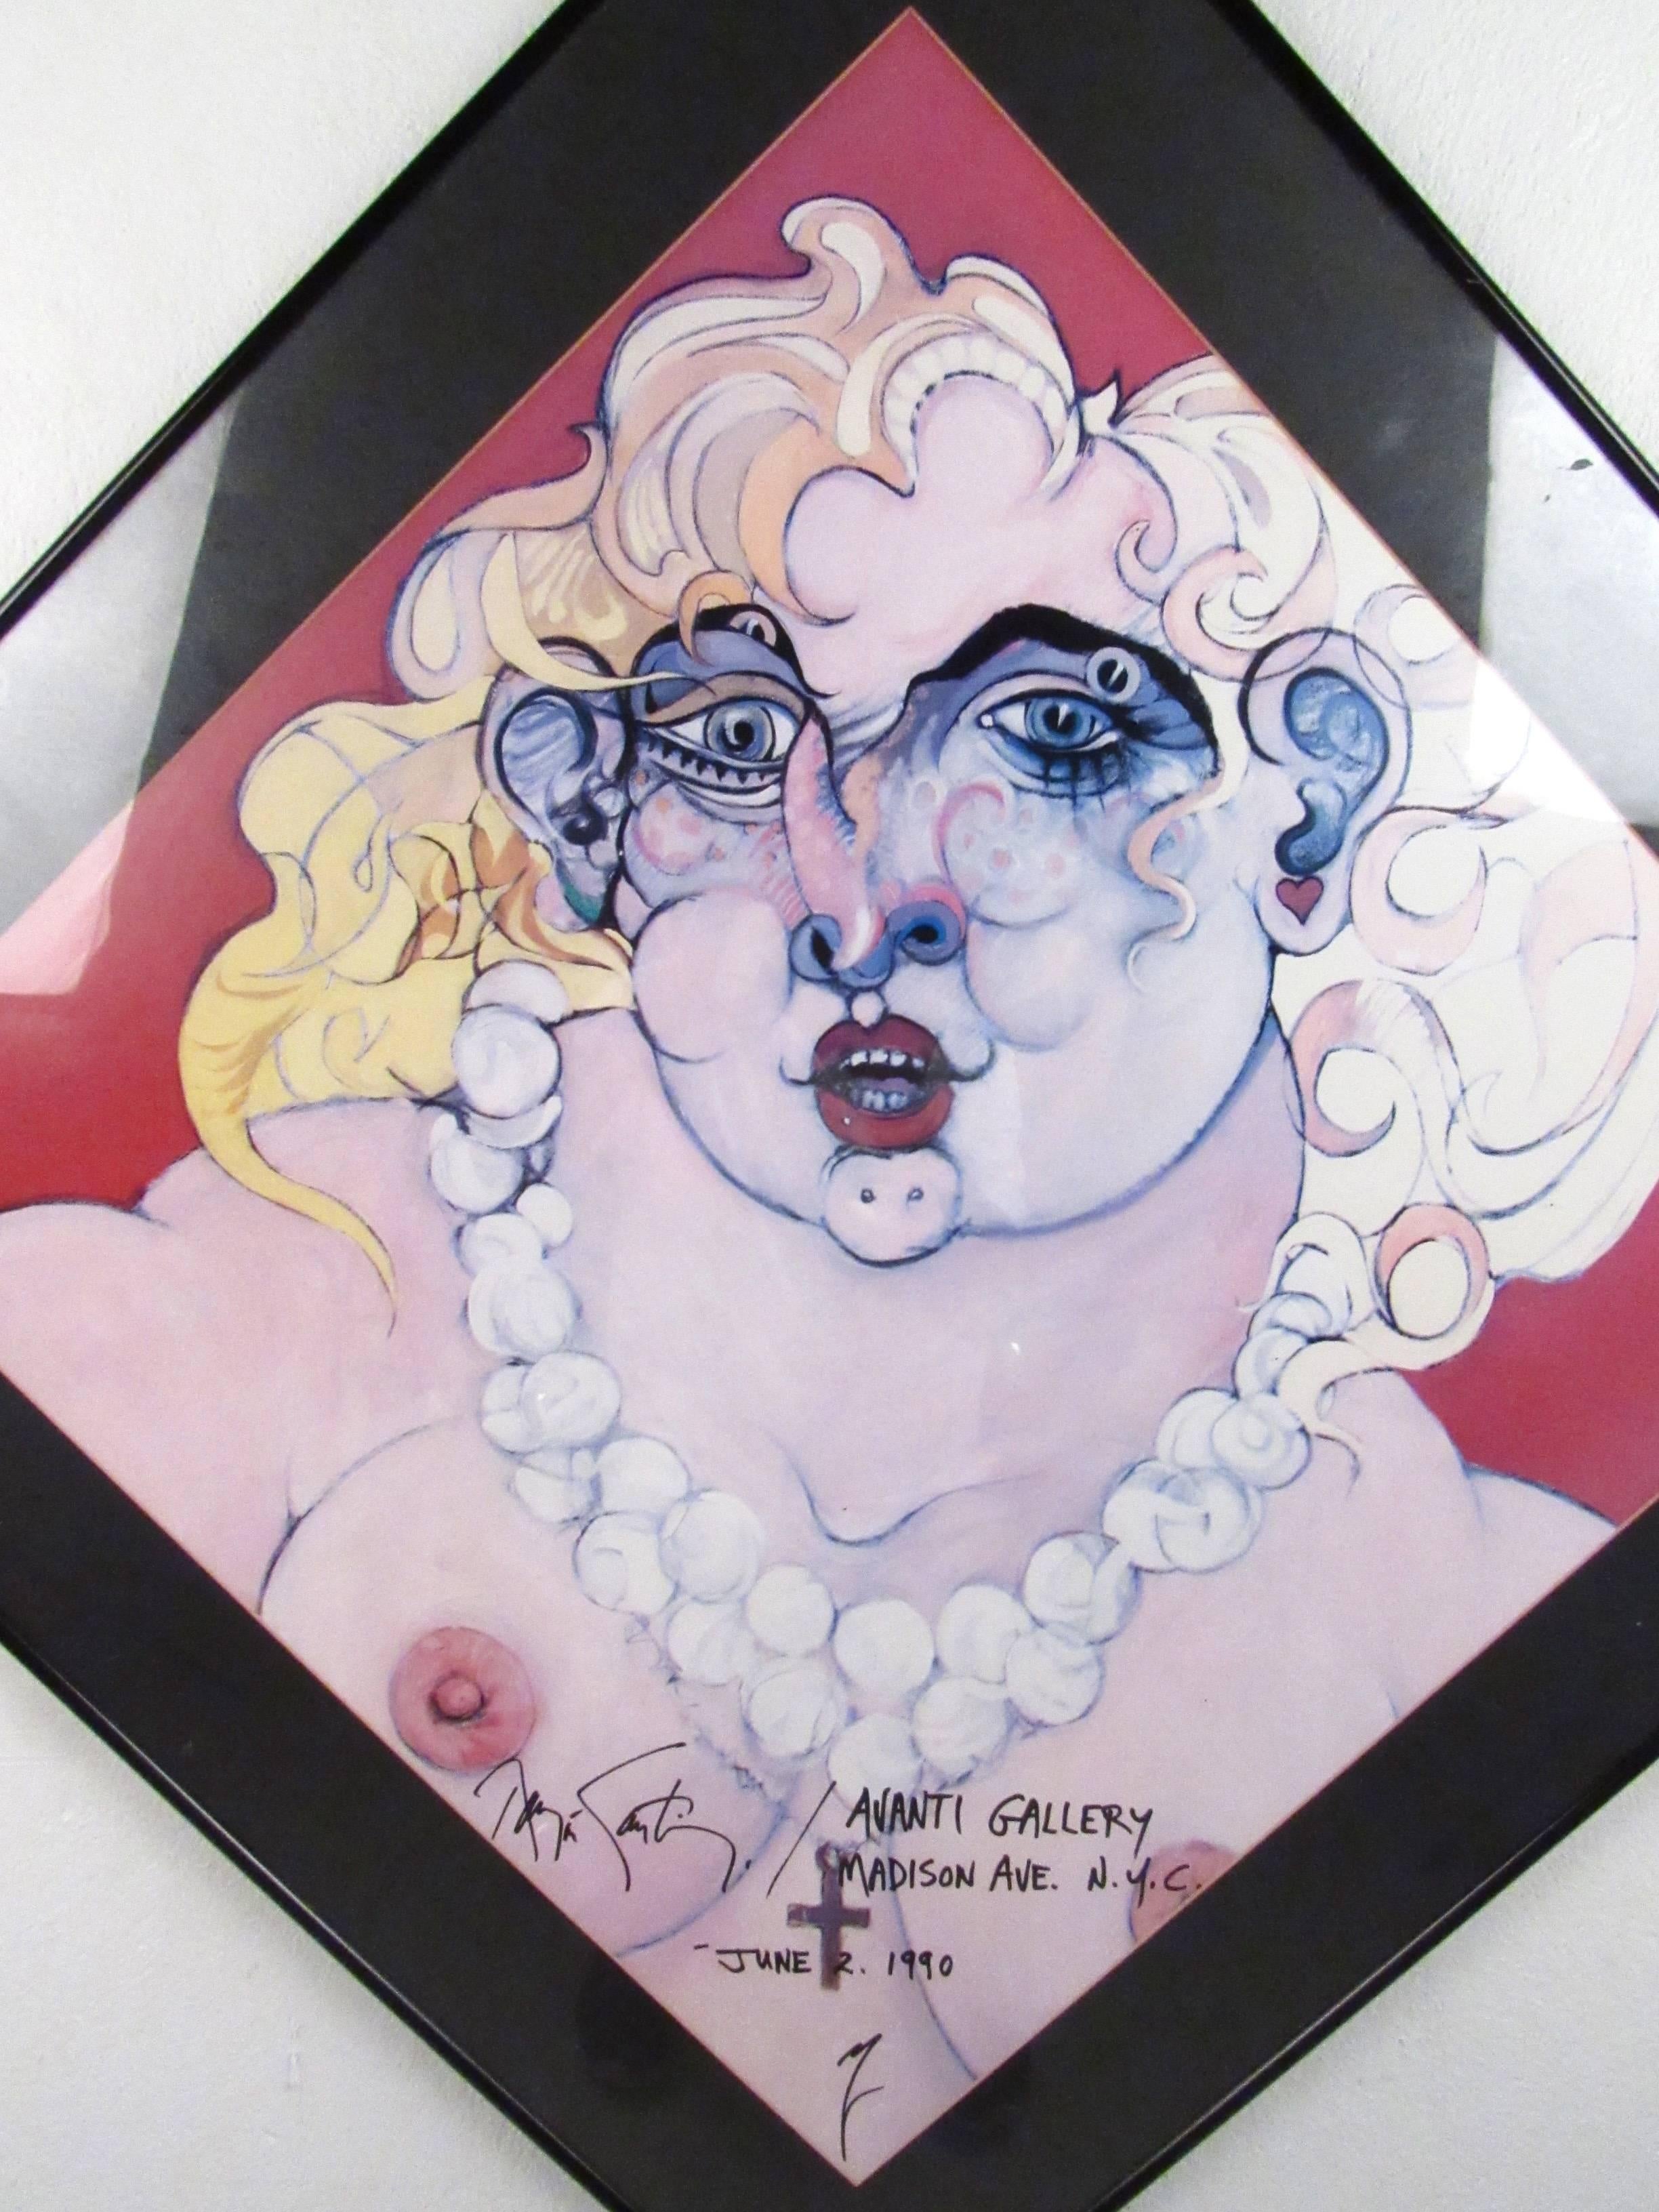 This unique nude caricature depicts a blonde woman in pearls, the colors and style of the artist make this an eye-catching piece for any modern interior. Signed and dated from the Avanti Gallery show on June 2, 1990 on Manhattan Ave NYC, artist's